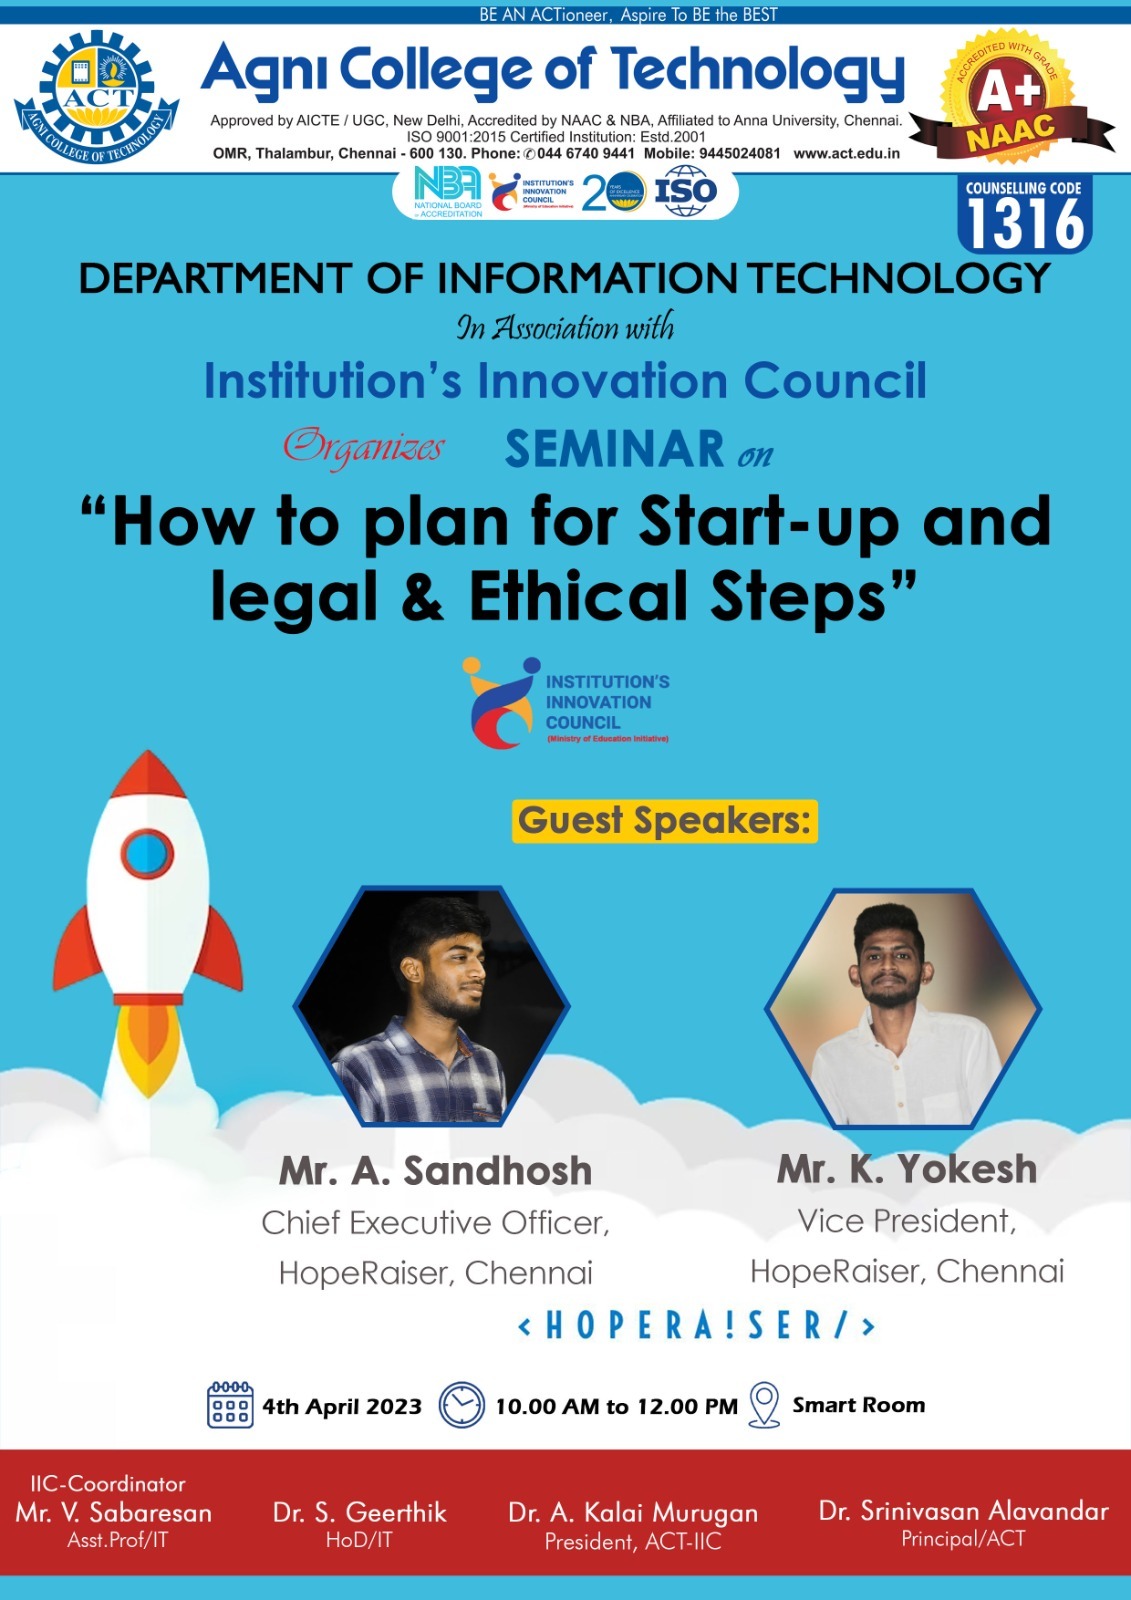 Seminar on How to plan for Start-Up and Legal & Ethical steps